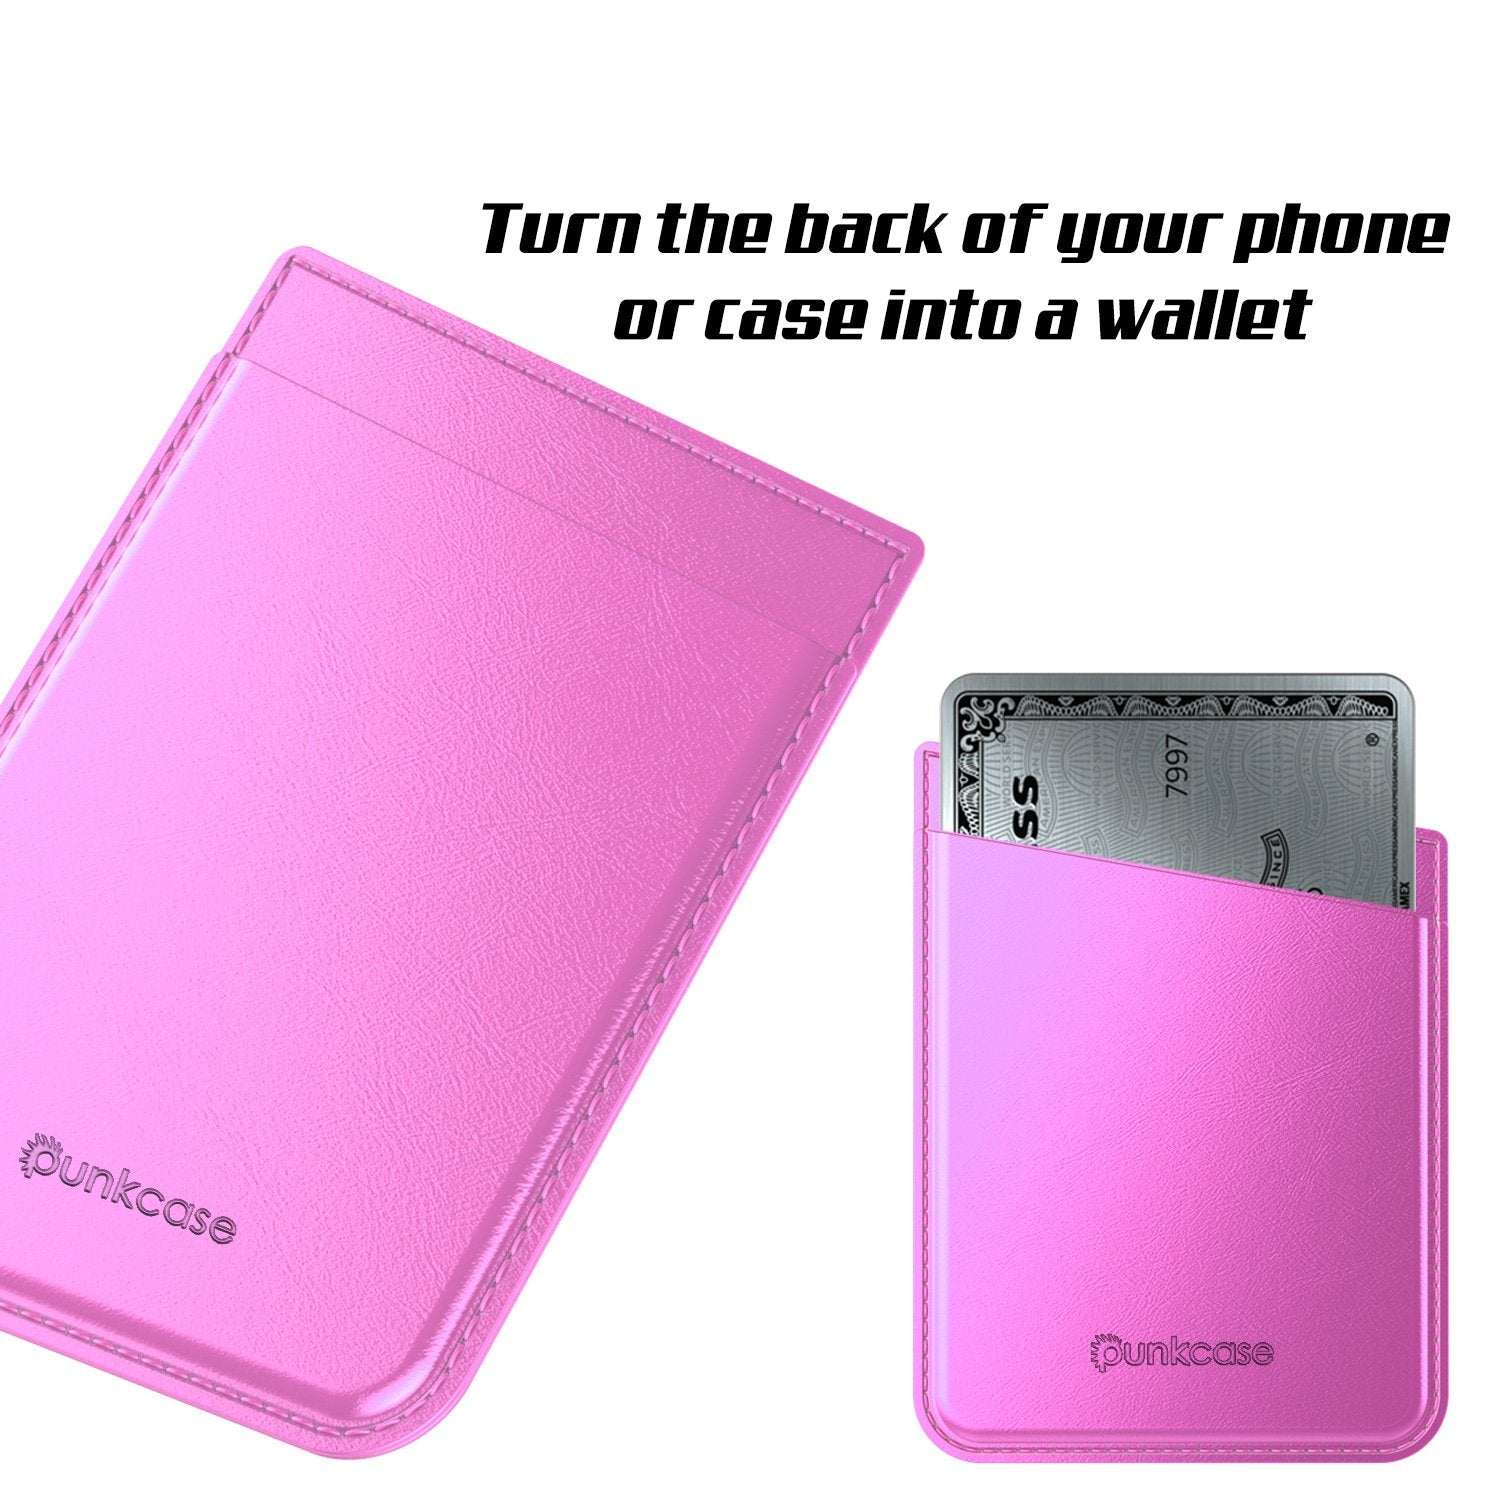 PunkCase CardStud Deluxe Stick On Wallet | Adhesive Card Holder Attachment for Back of iPhone, Android & More | Leather Pouch | [Pink] - PunkCase NZ